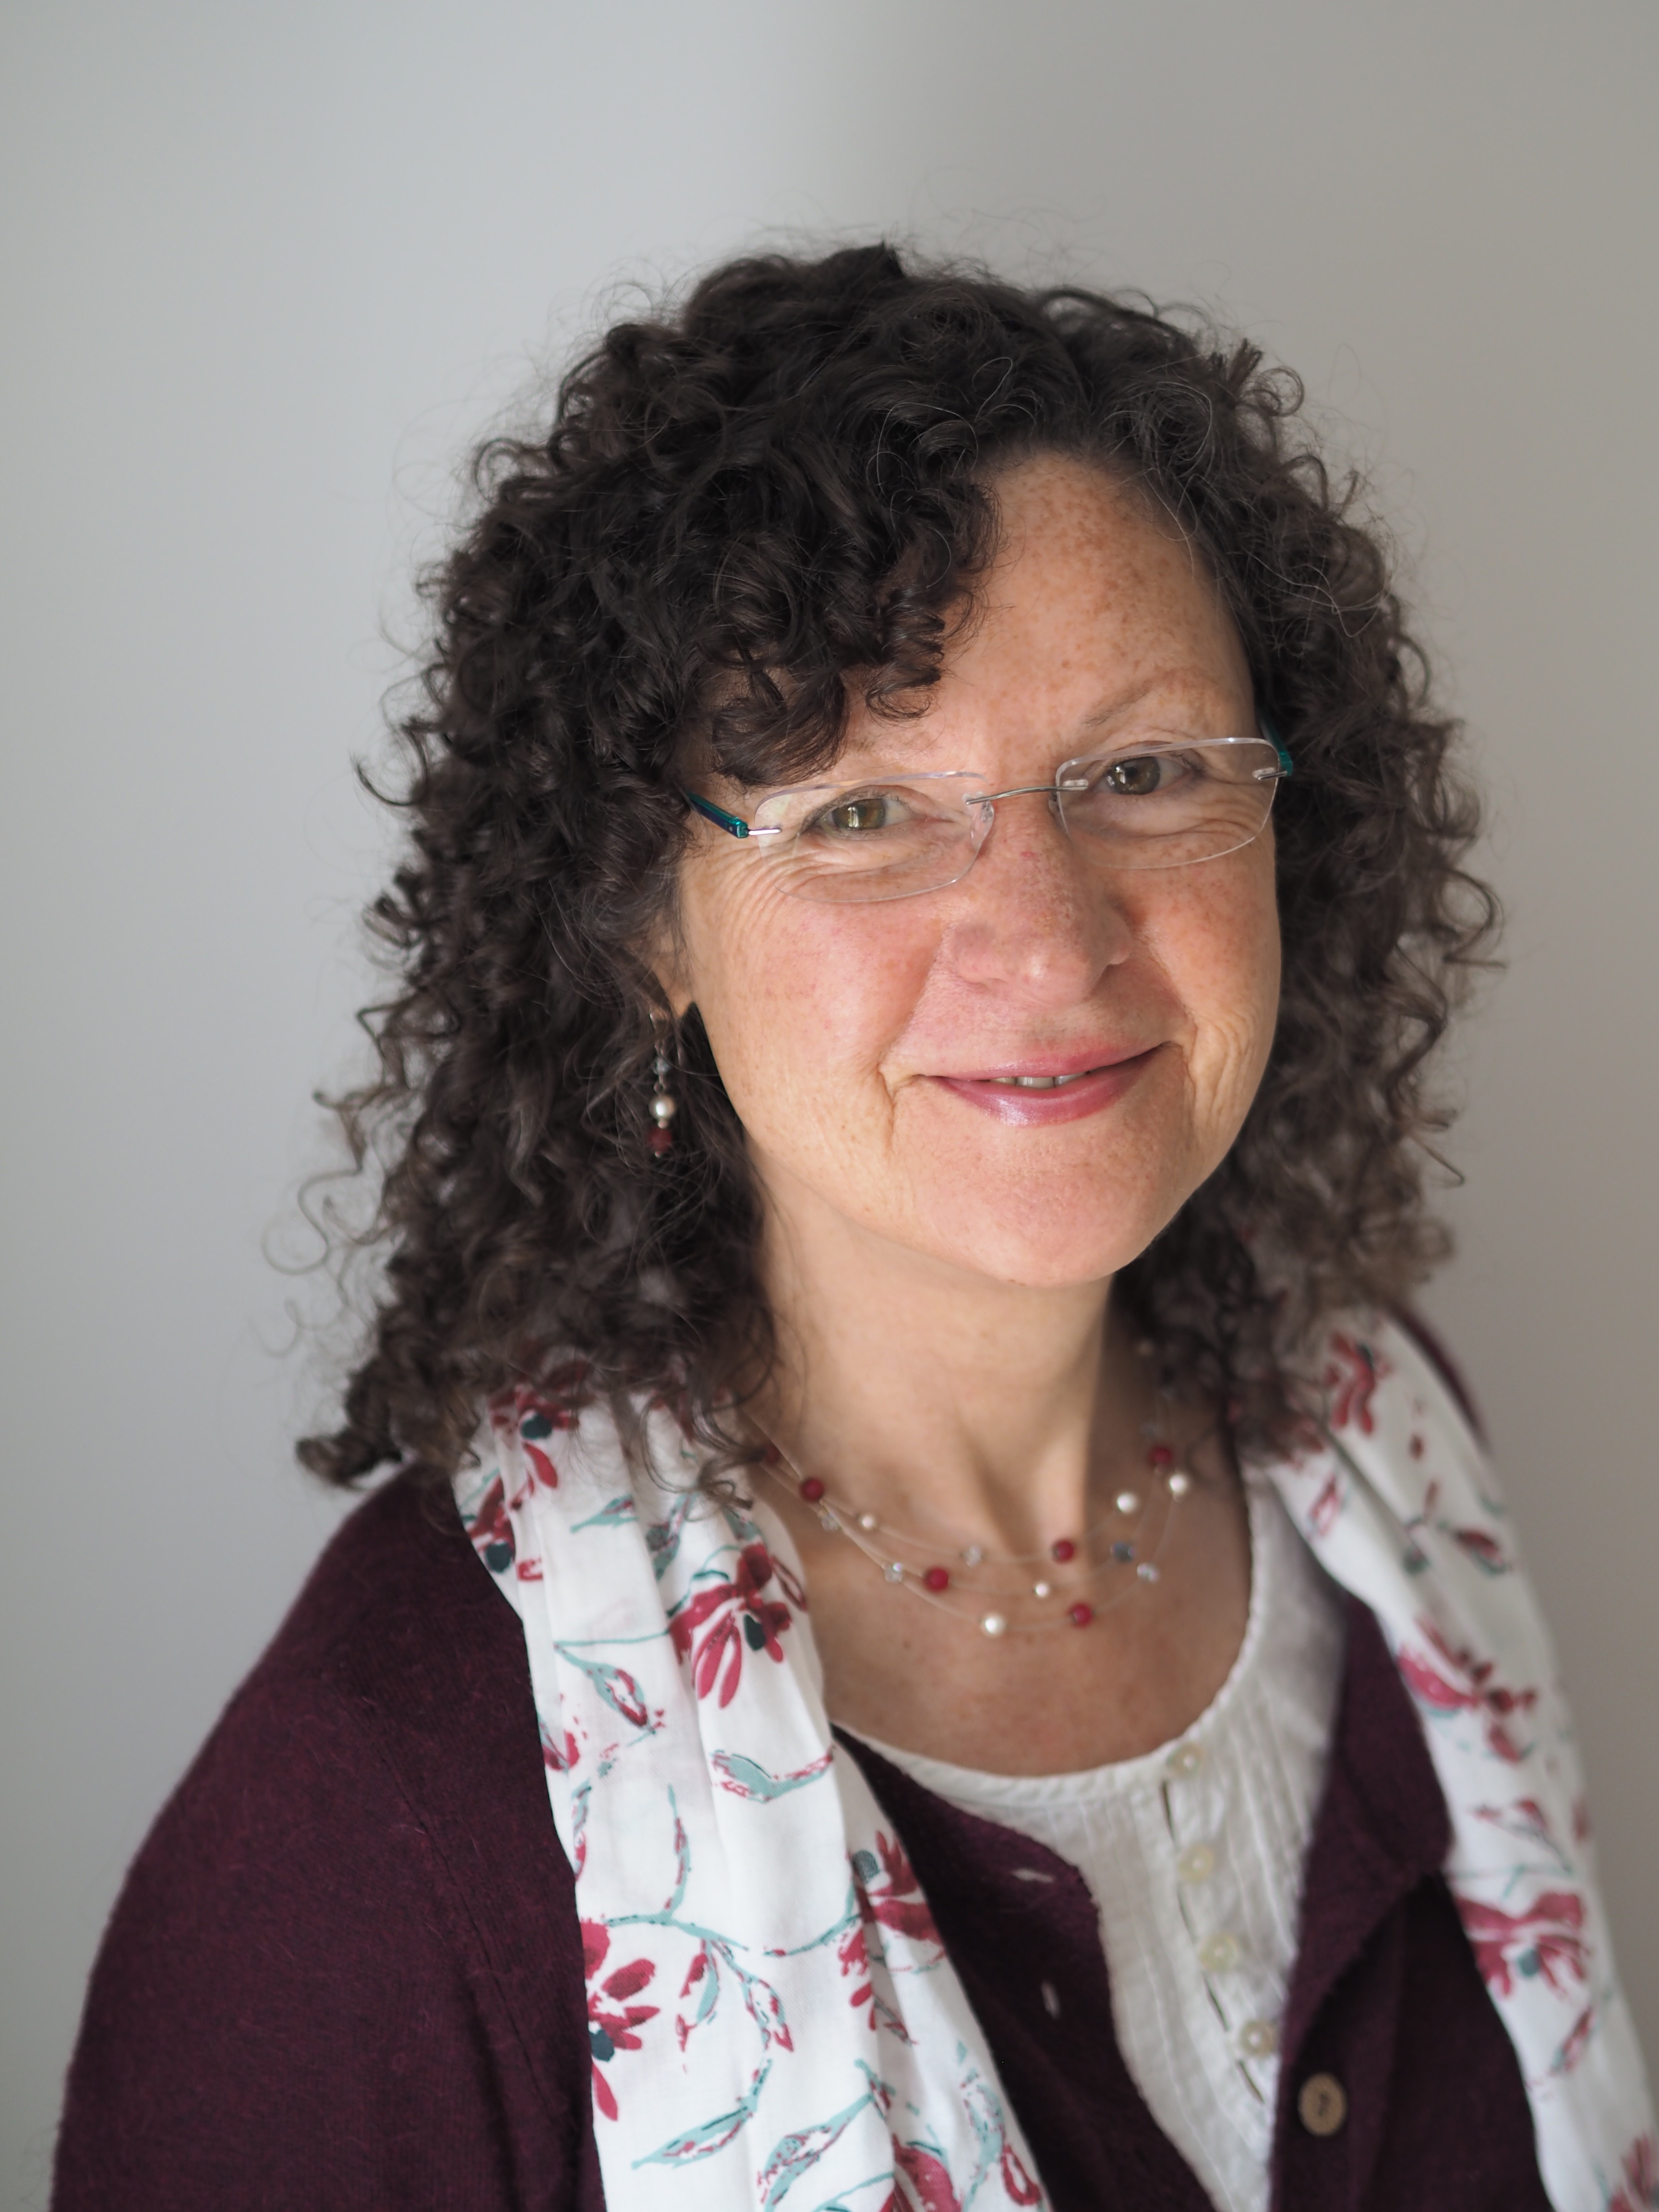 Profile picture for Suzanna Hobkirk  Homeopath and Humanistic Practitioner